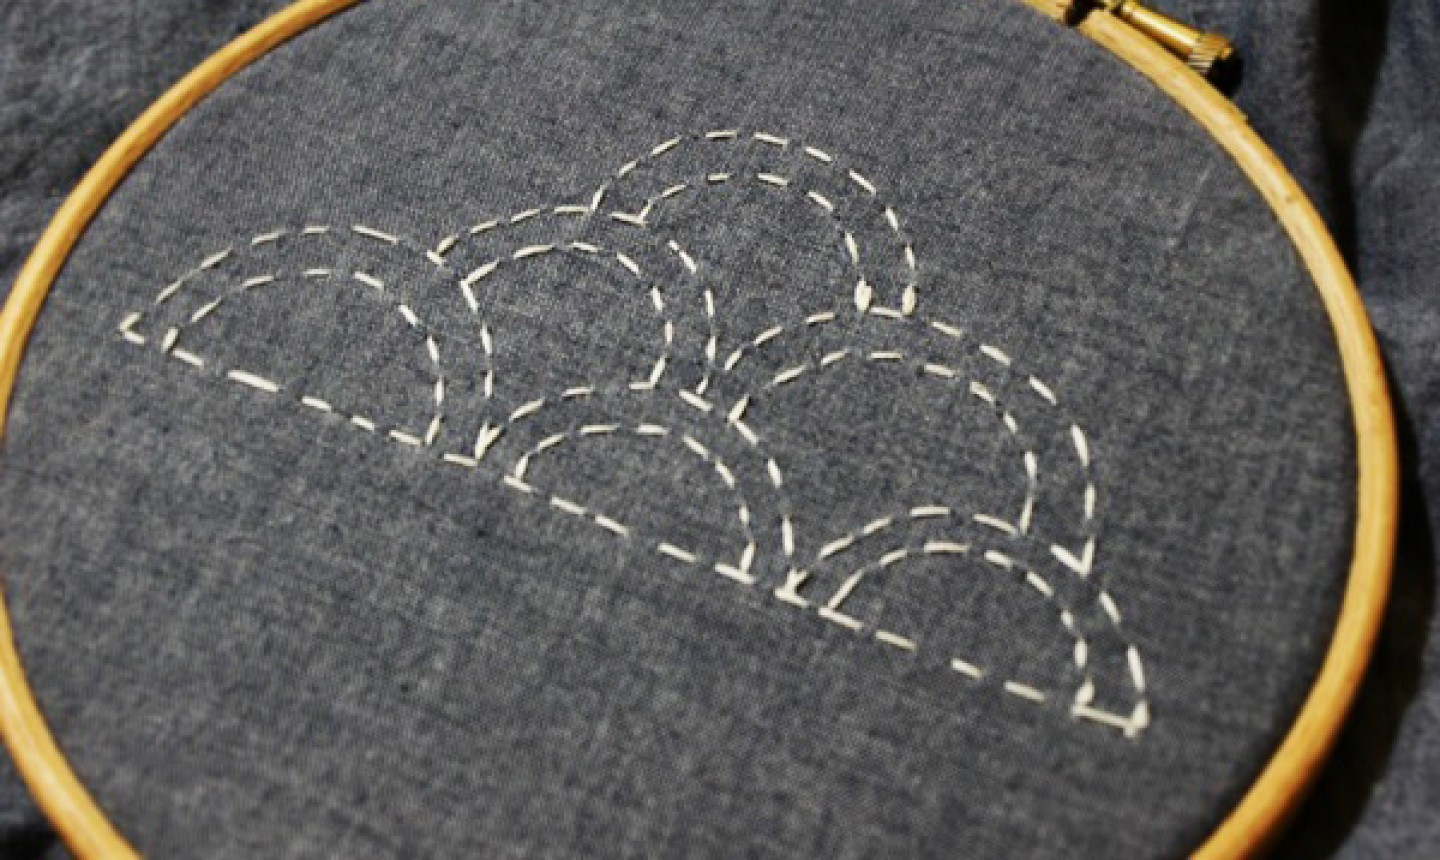 Paper Embroidery Cards Free Patterns Learn Simple Sashiko Embroidery With This Whimsical Cloud Pattern